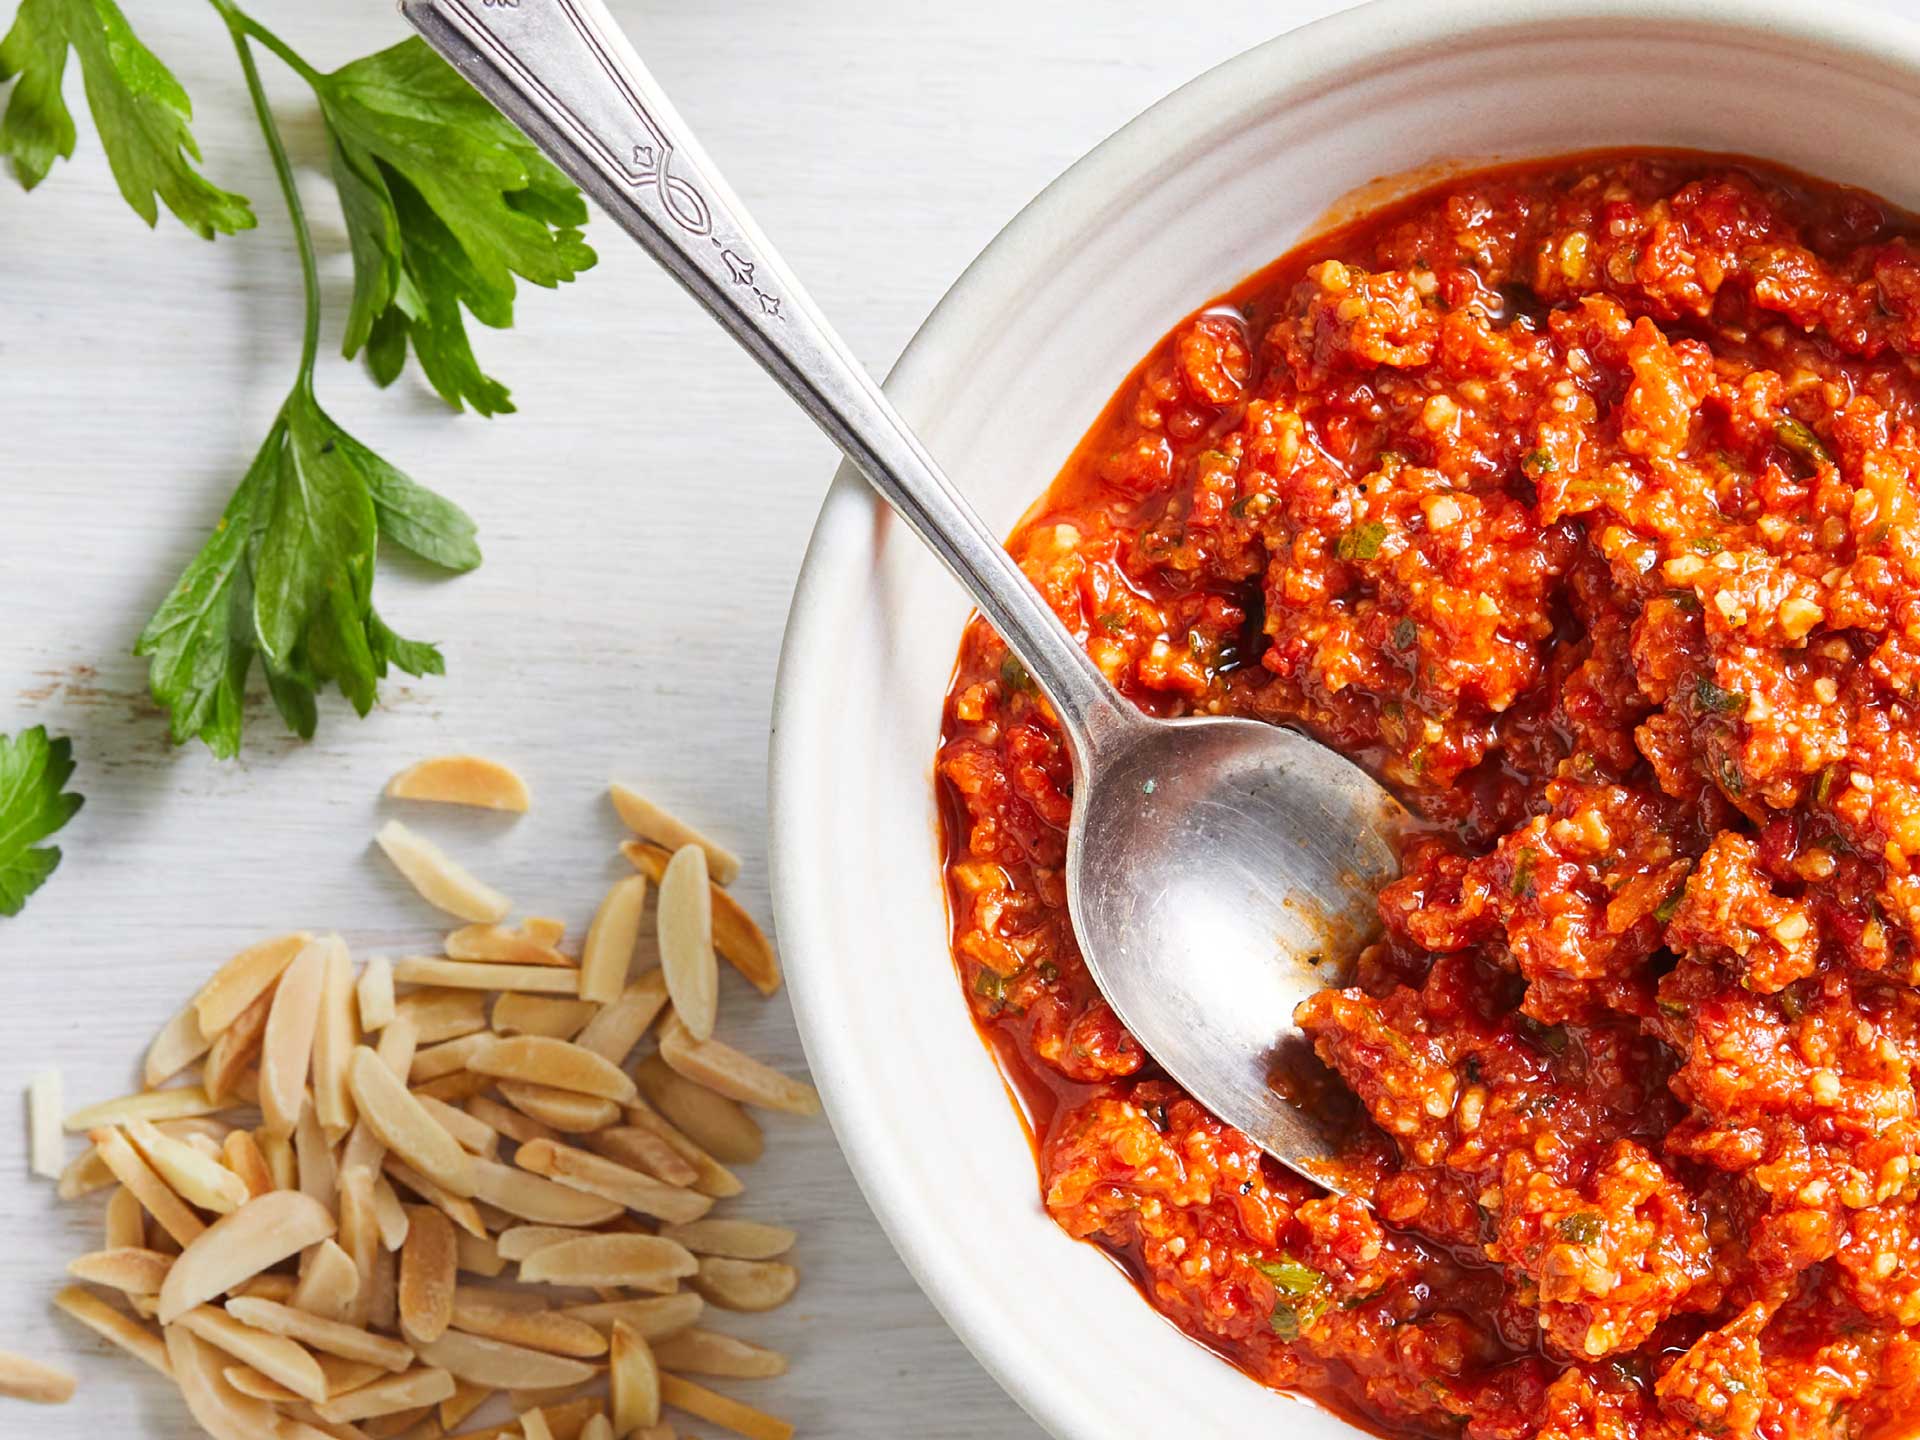 A flavourful tomato sauce with a spicy kick, topped with crunchy almonds